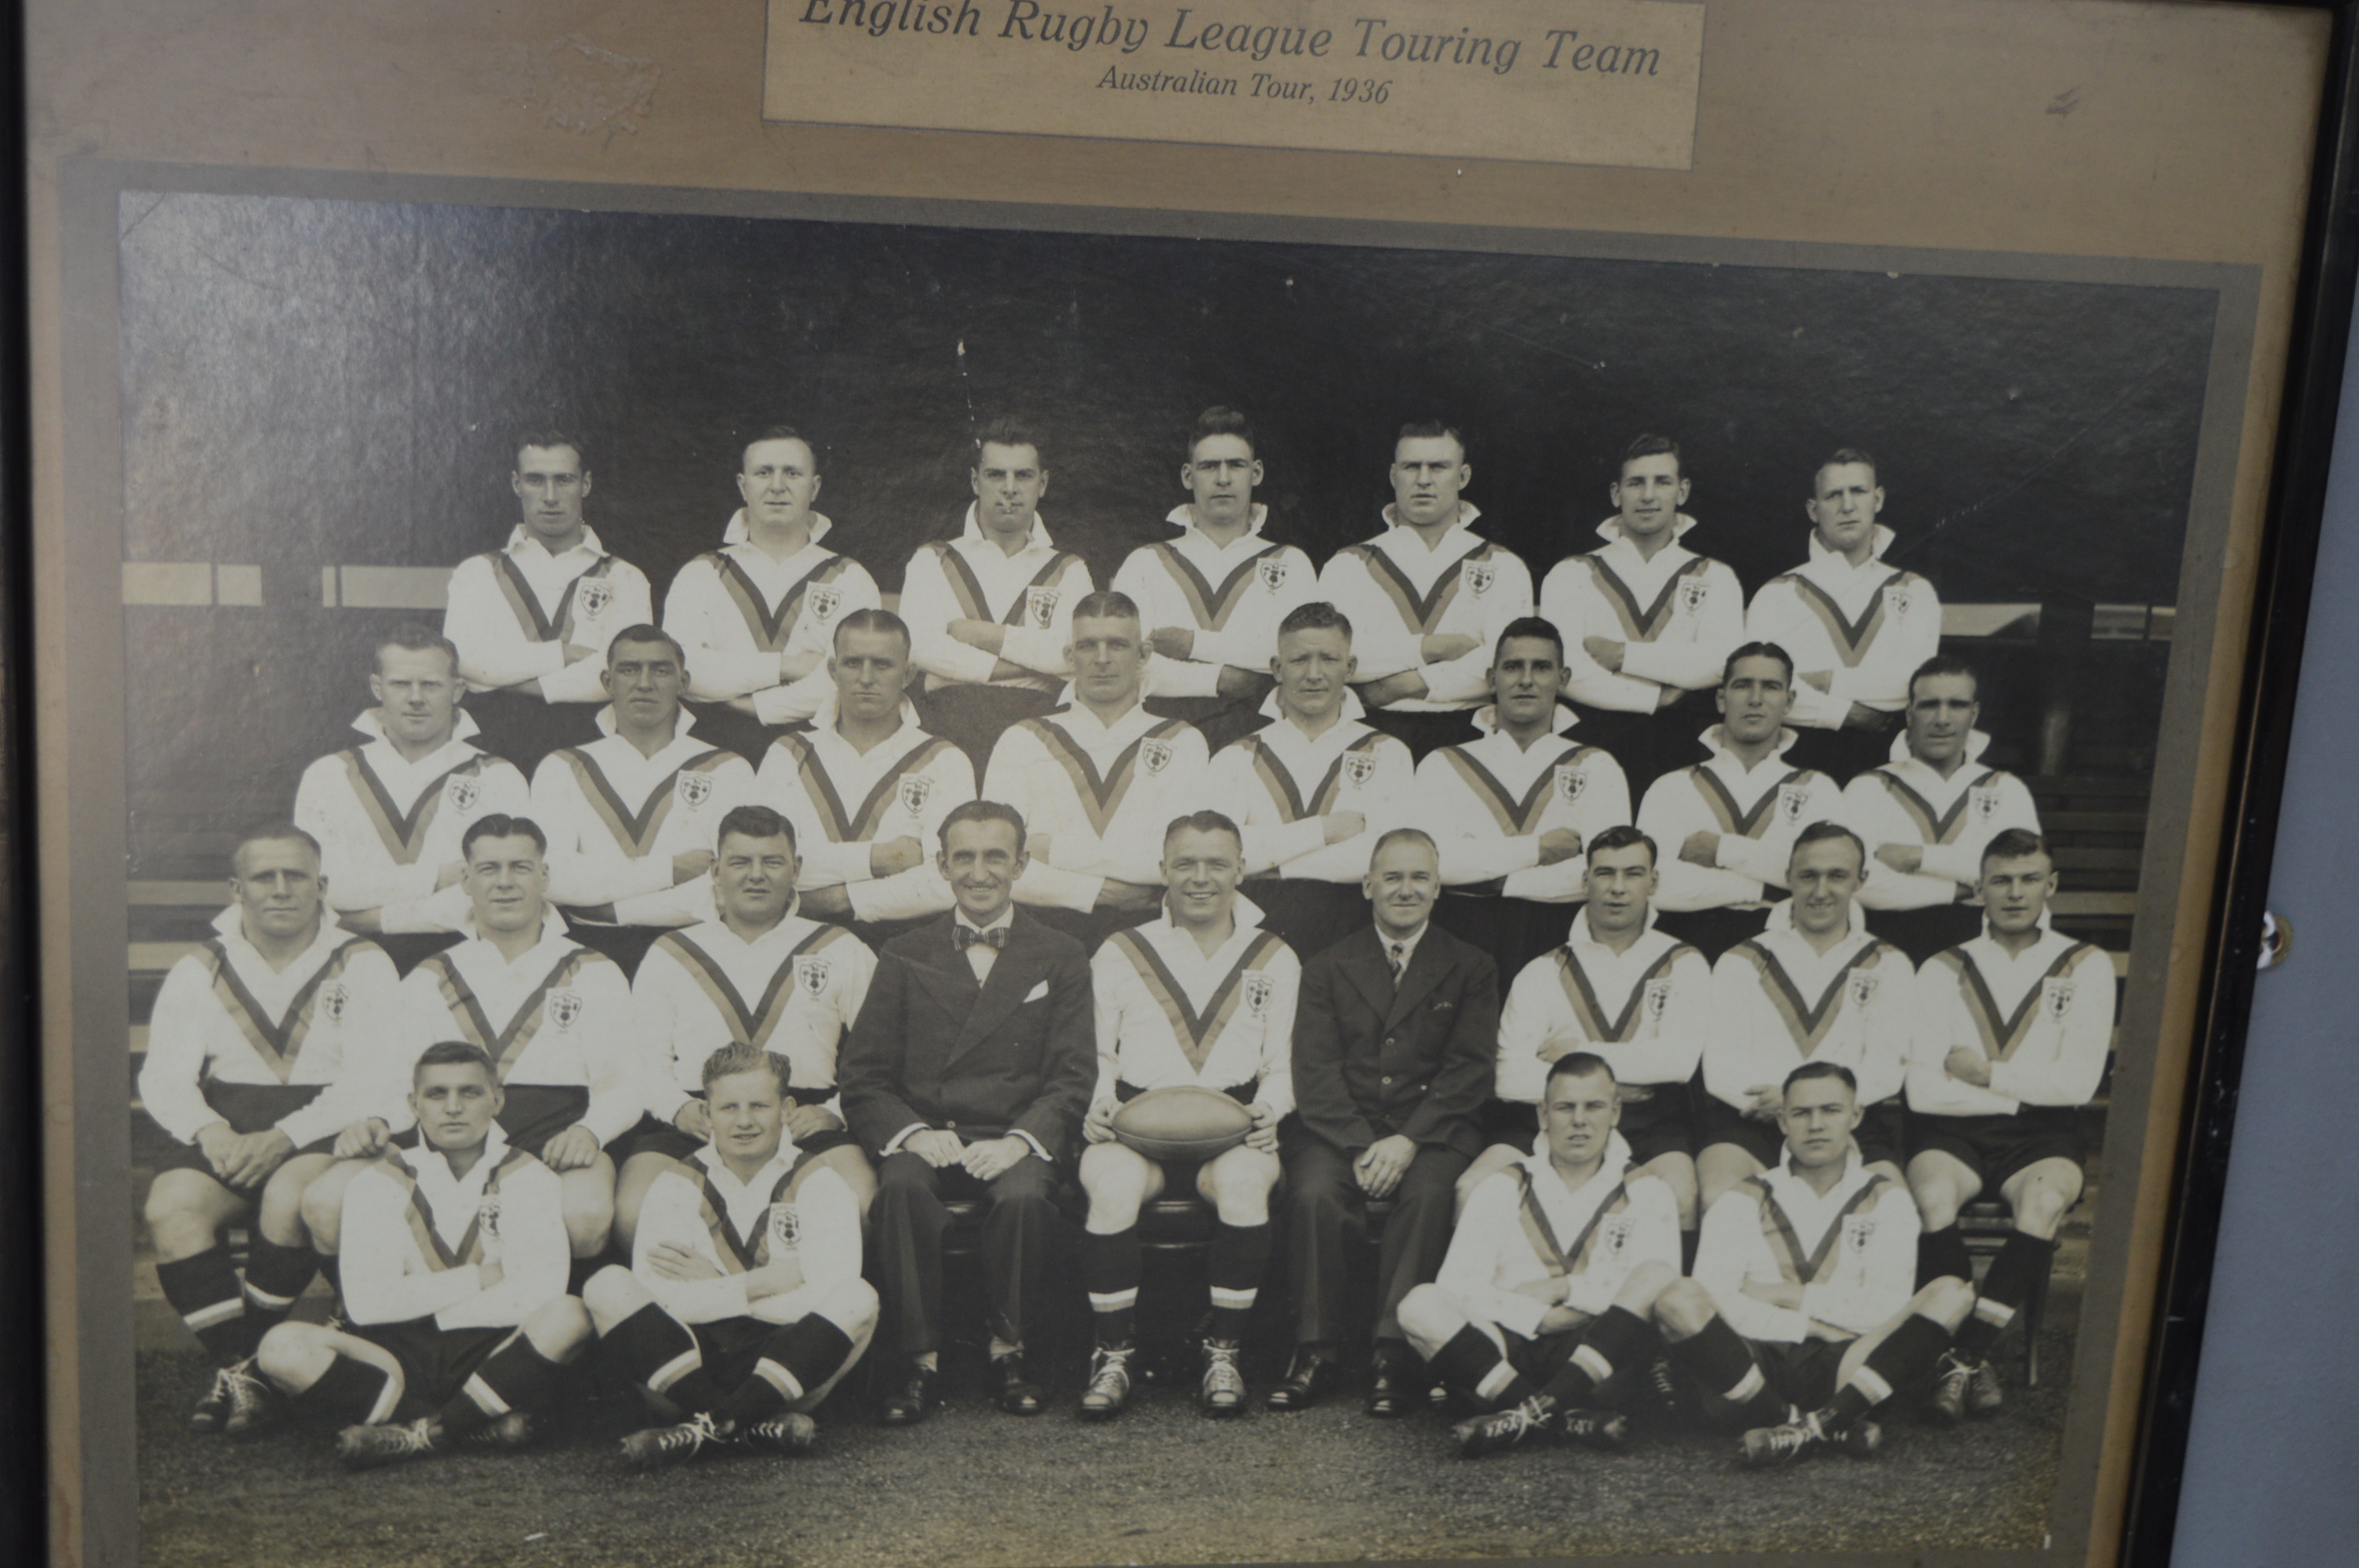 Framed English Rugby League Team Photograph 1936 - Image 2 of 2